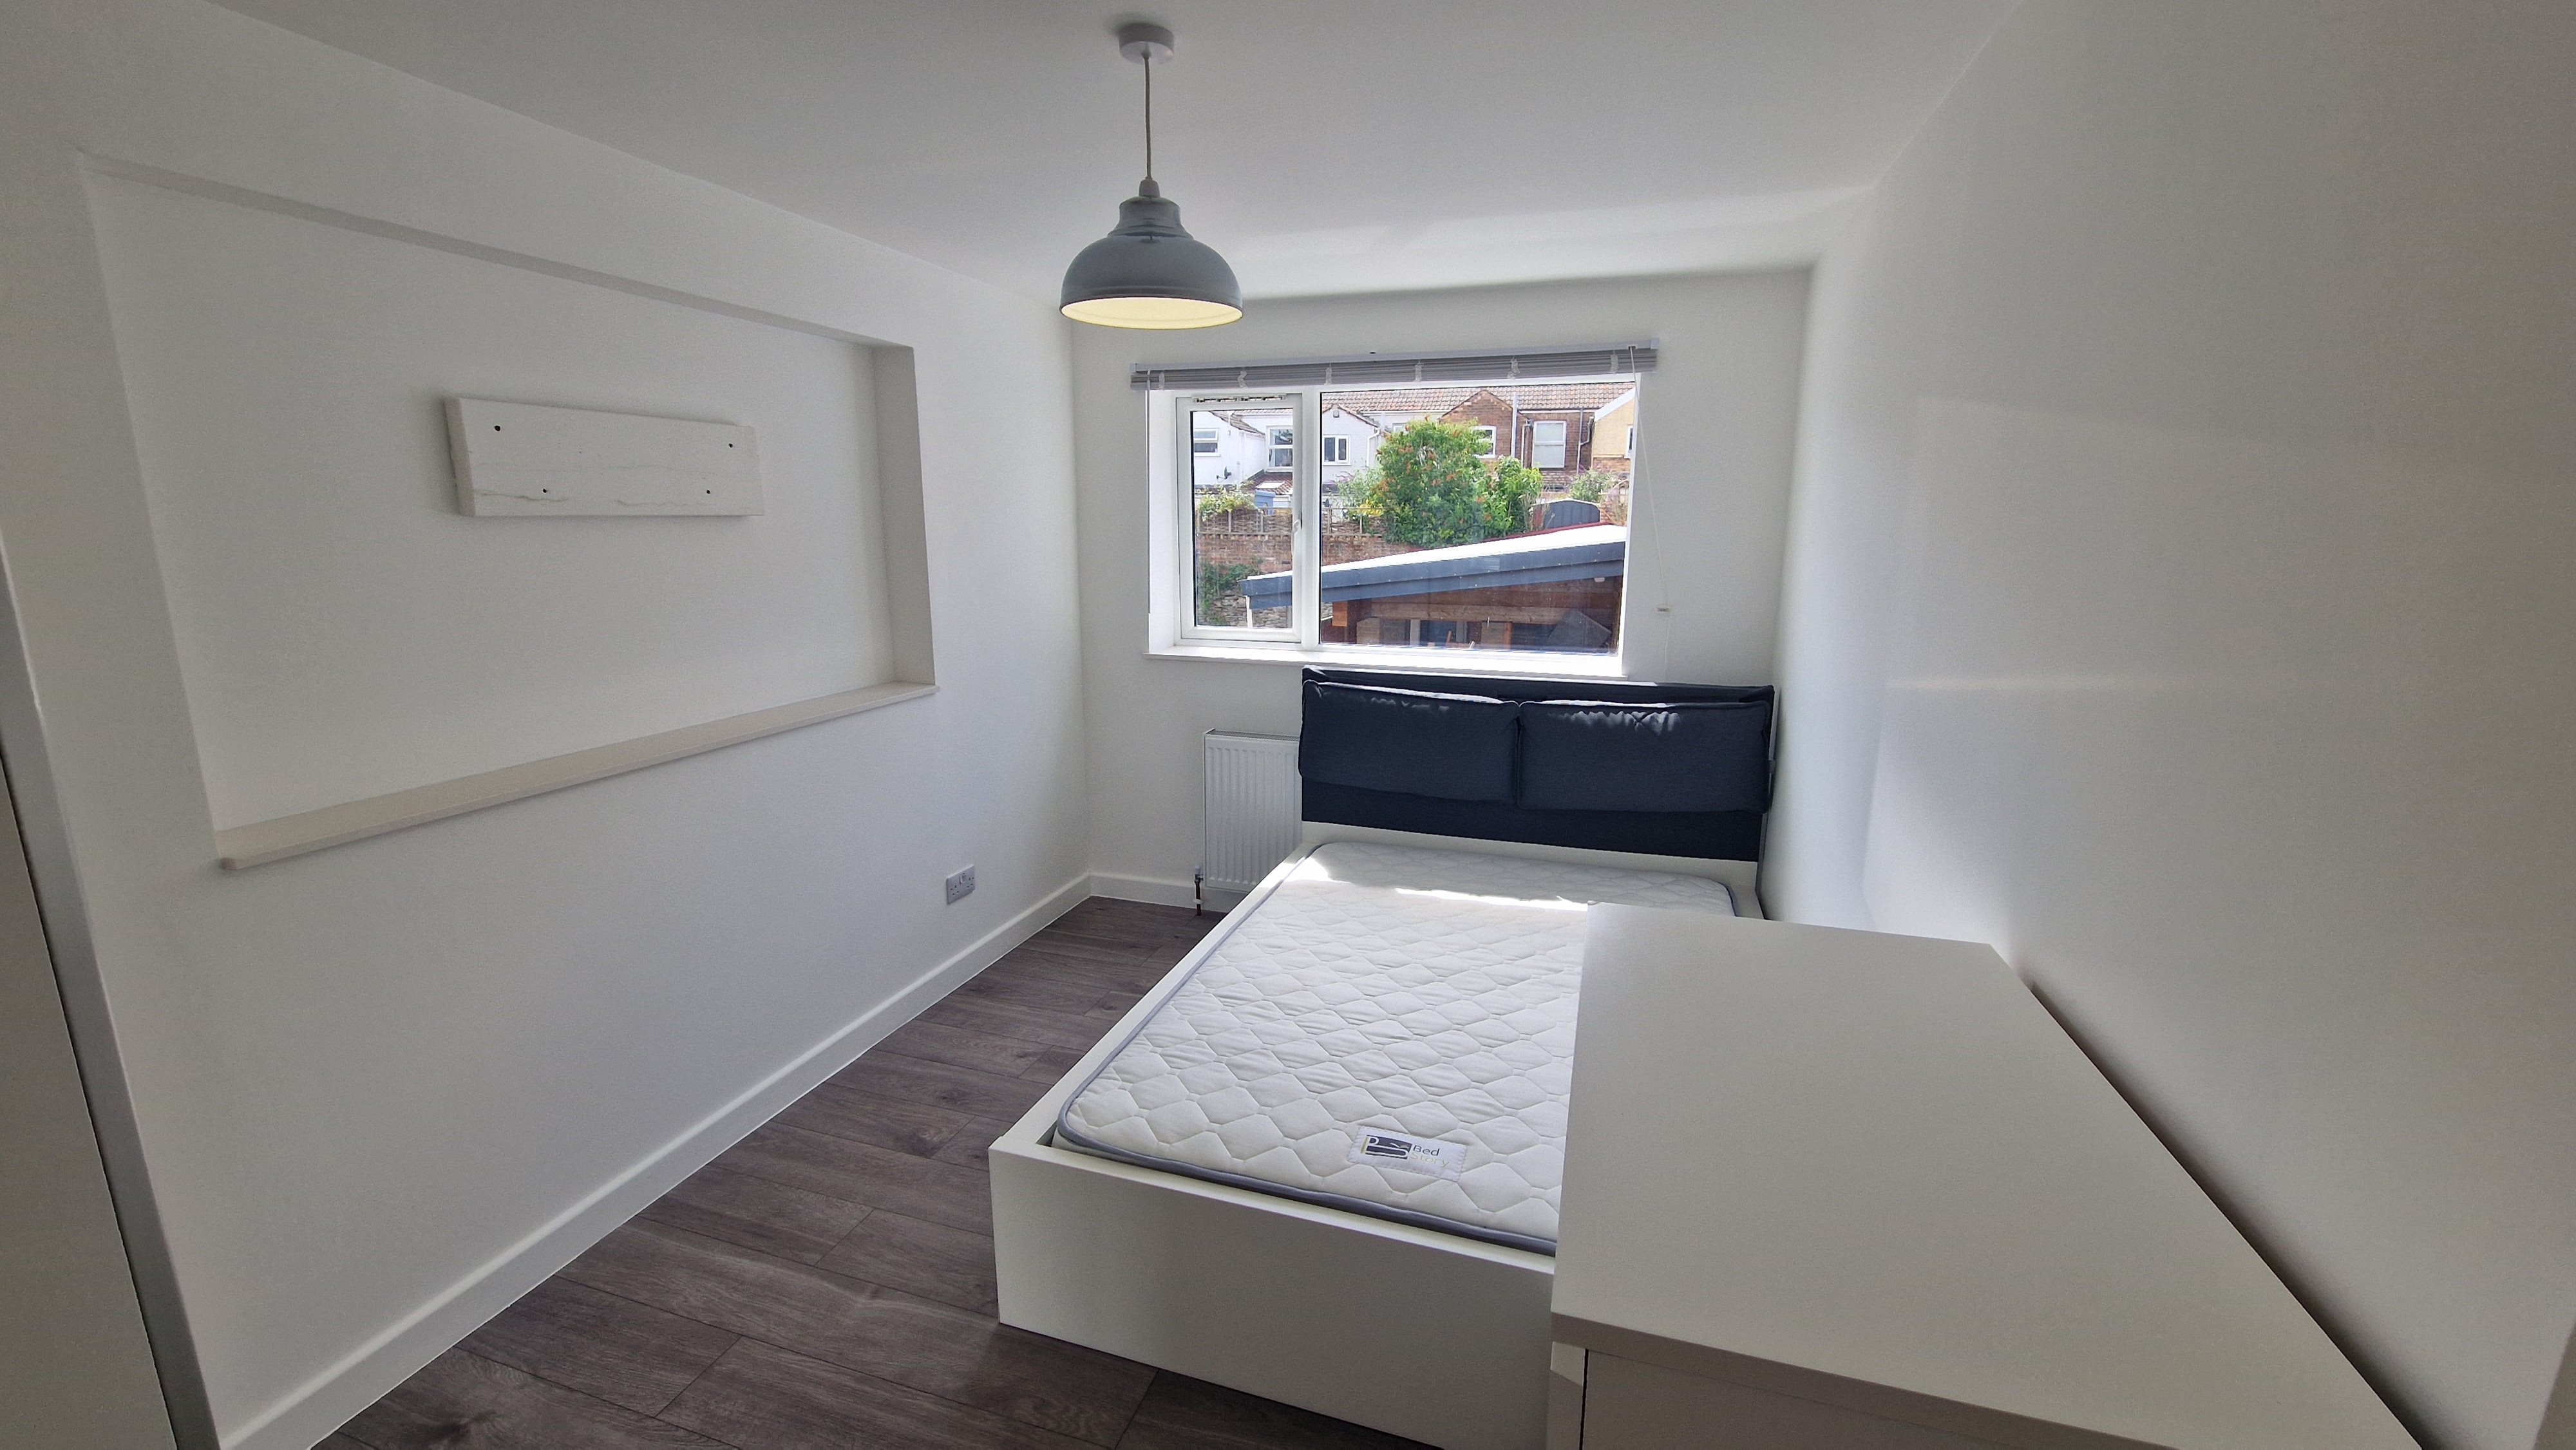 1 bed house / flat share to rent in Kingston Road, TA2 